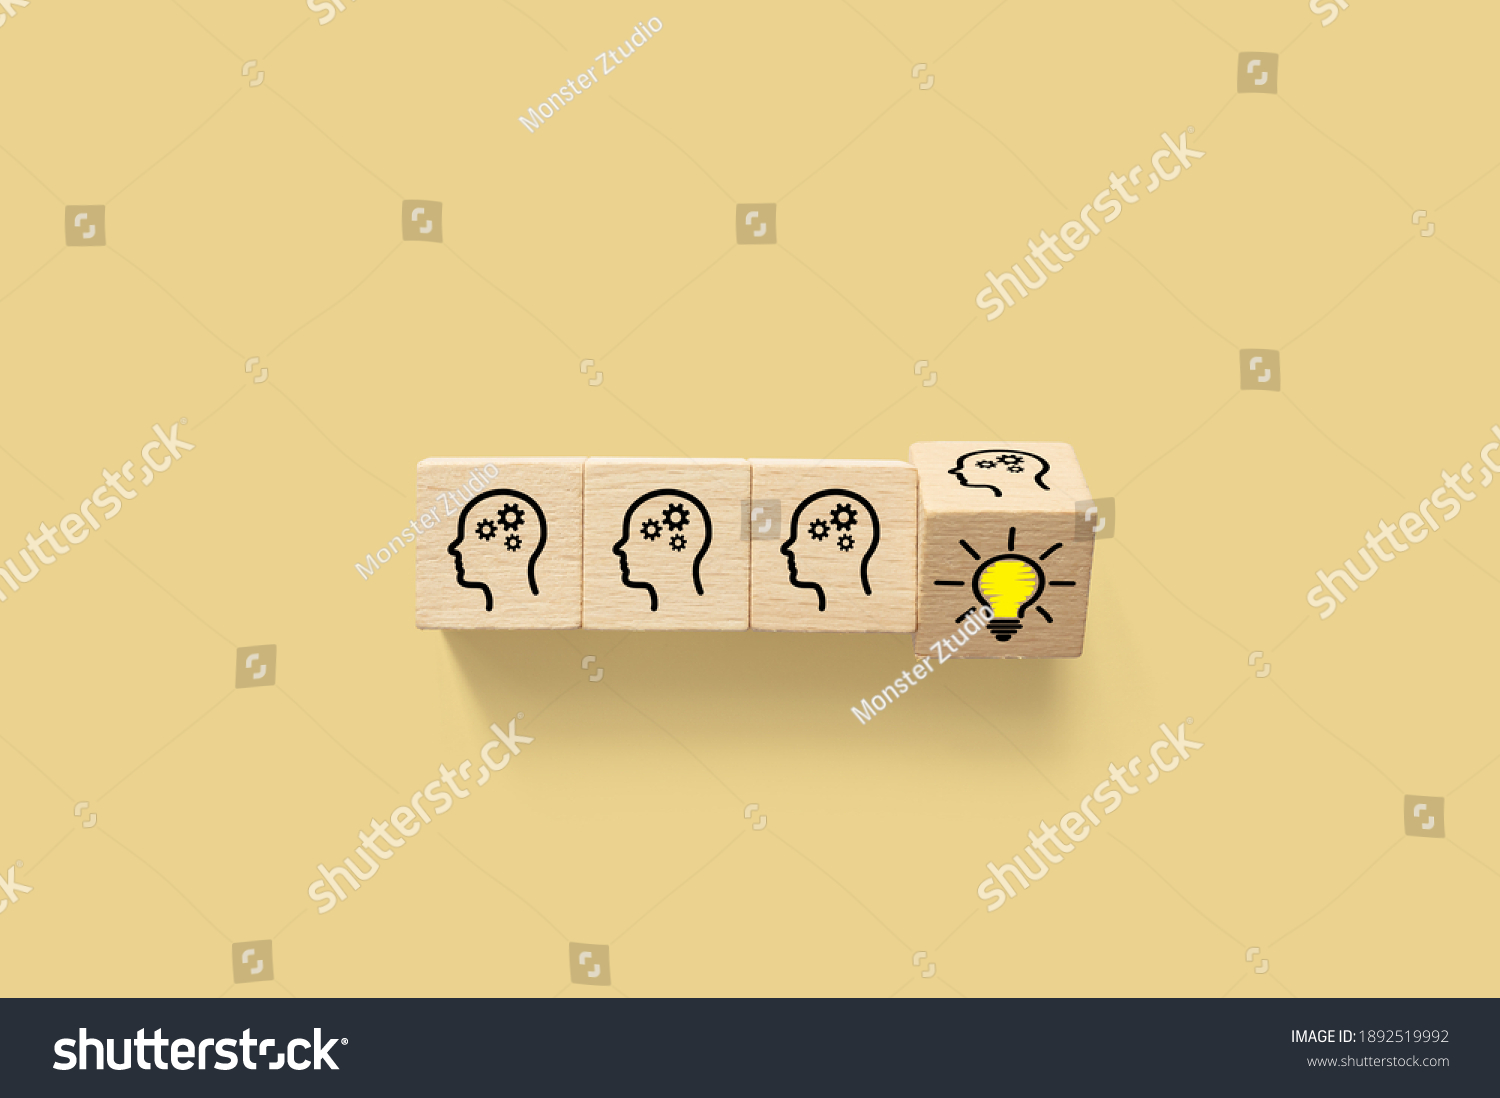 Concept creative idea and innovation. Wooden cube block with head human symbol and light bulb icon #1892519992